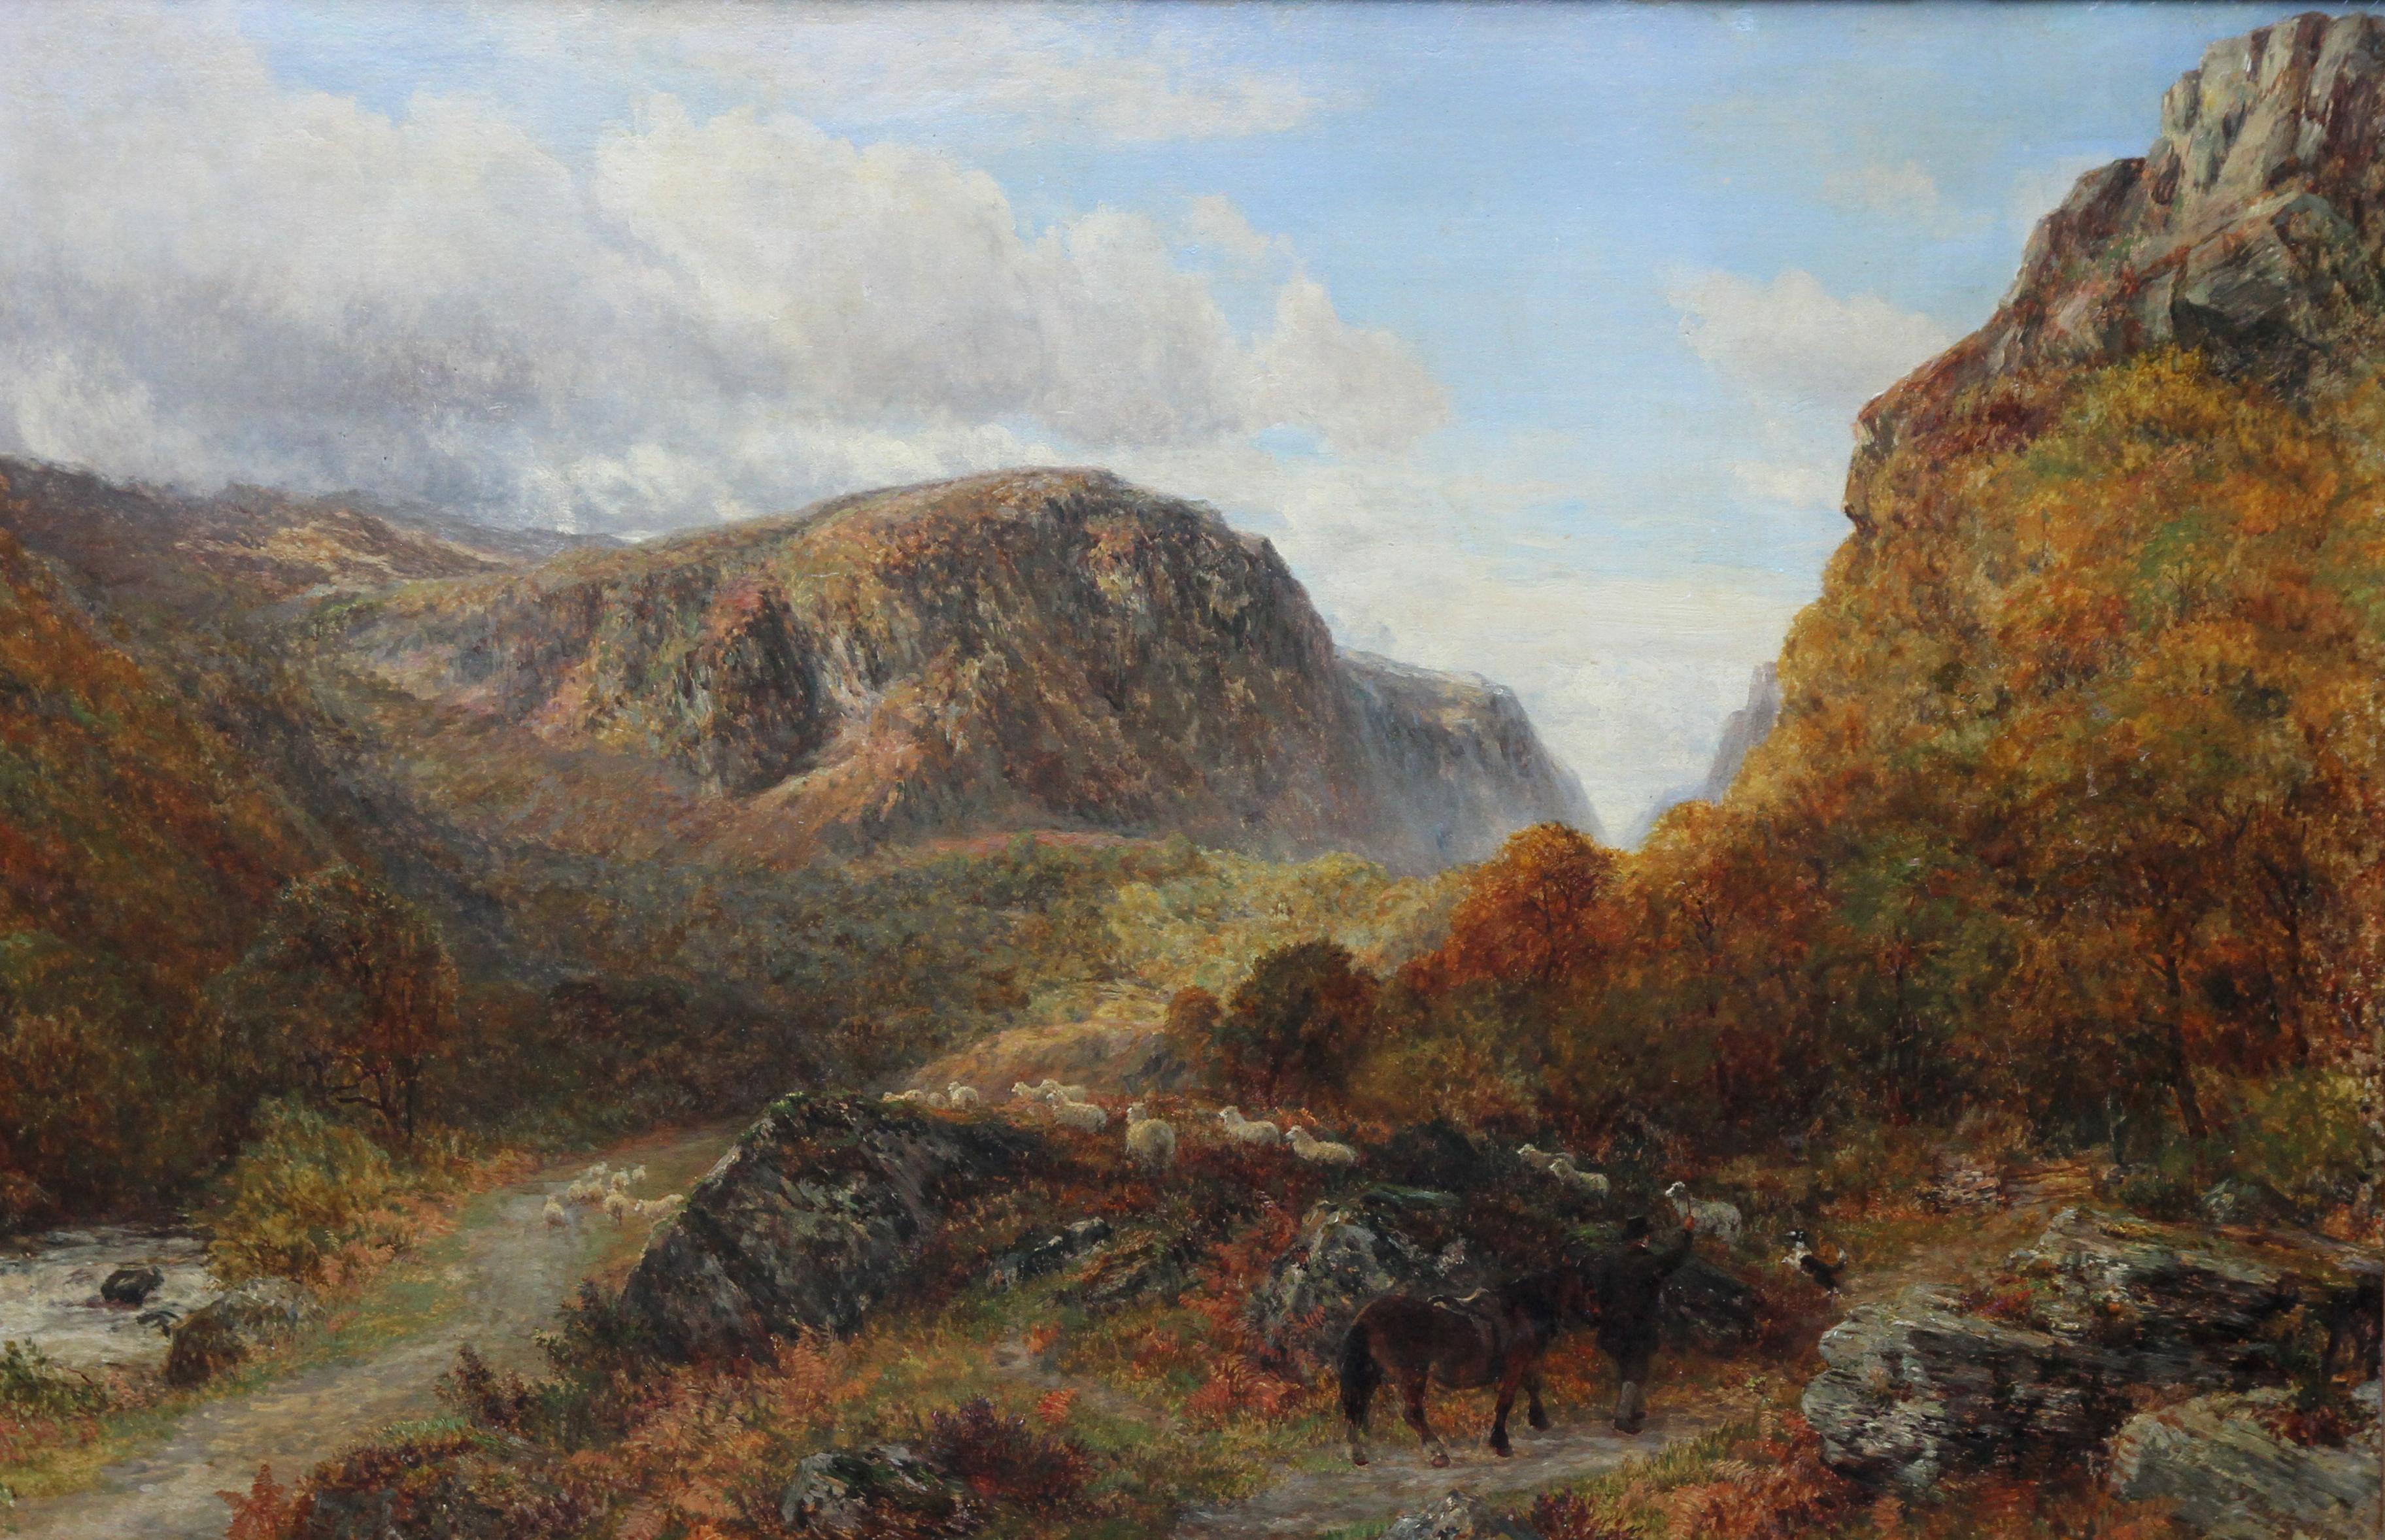 Gathering the Sheep - British Victorian art landscape oil painting Snowdon Wales 2